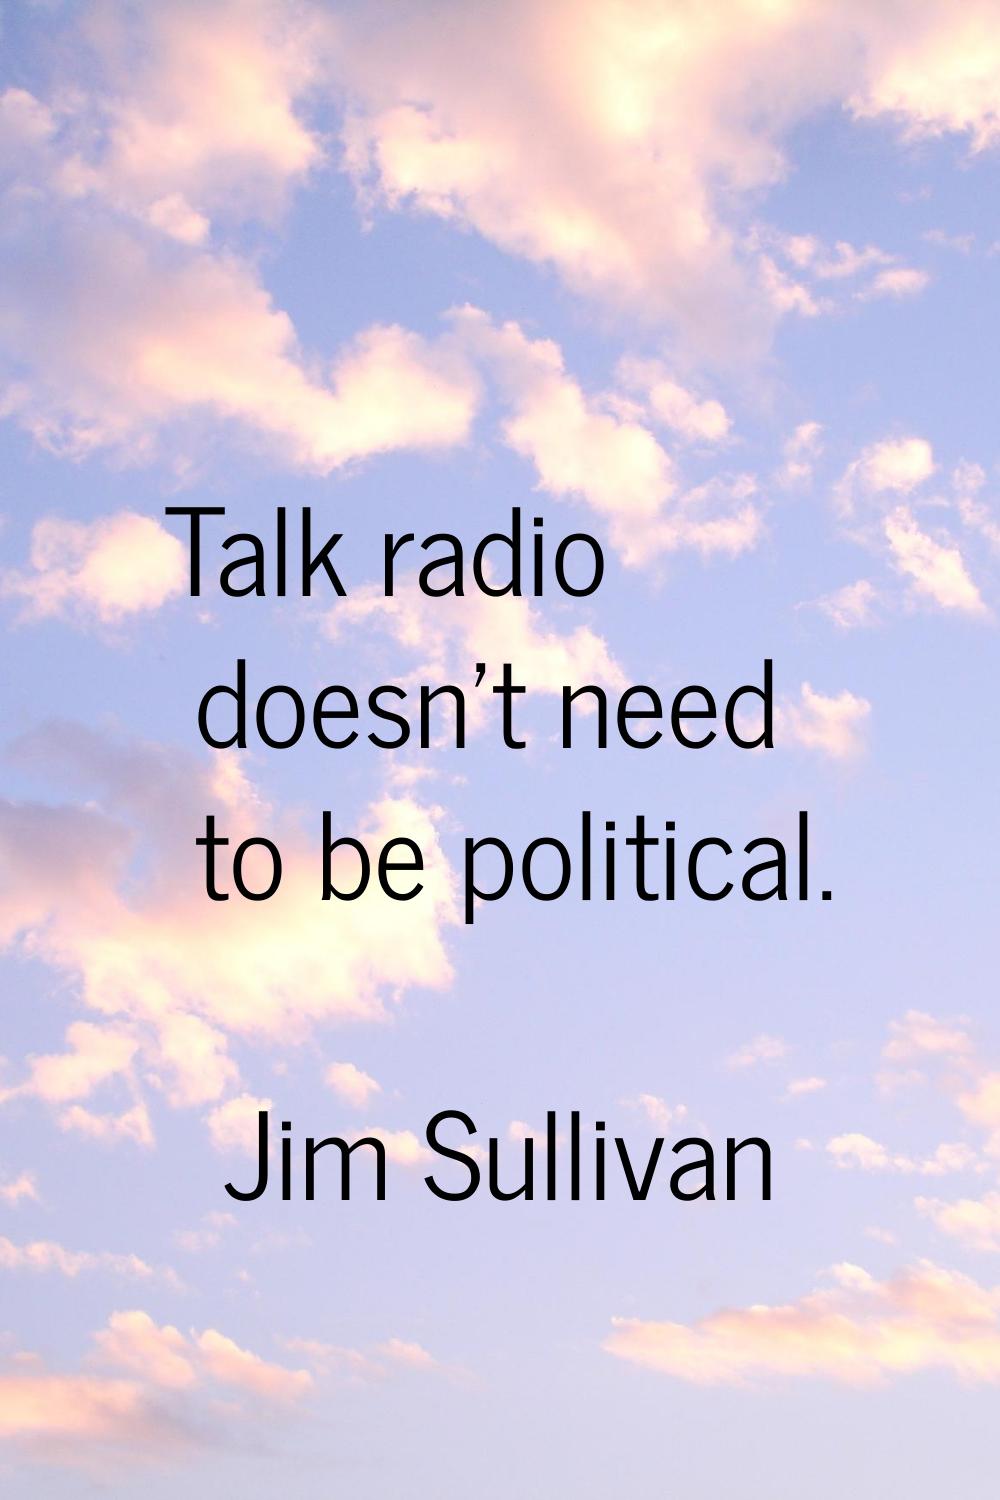 Talk radio doesn't need to be political.